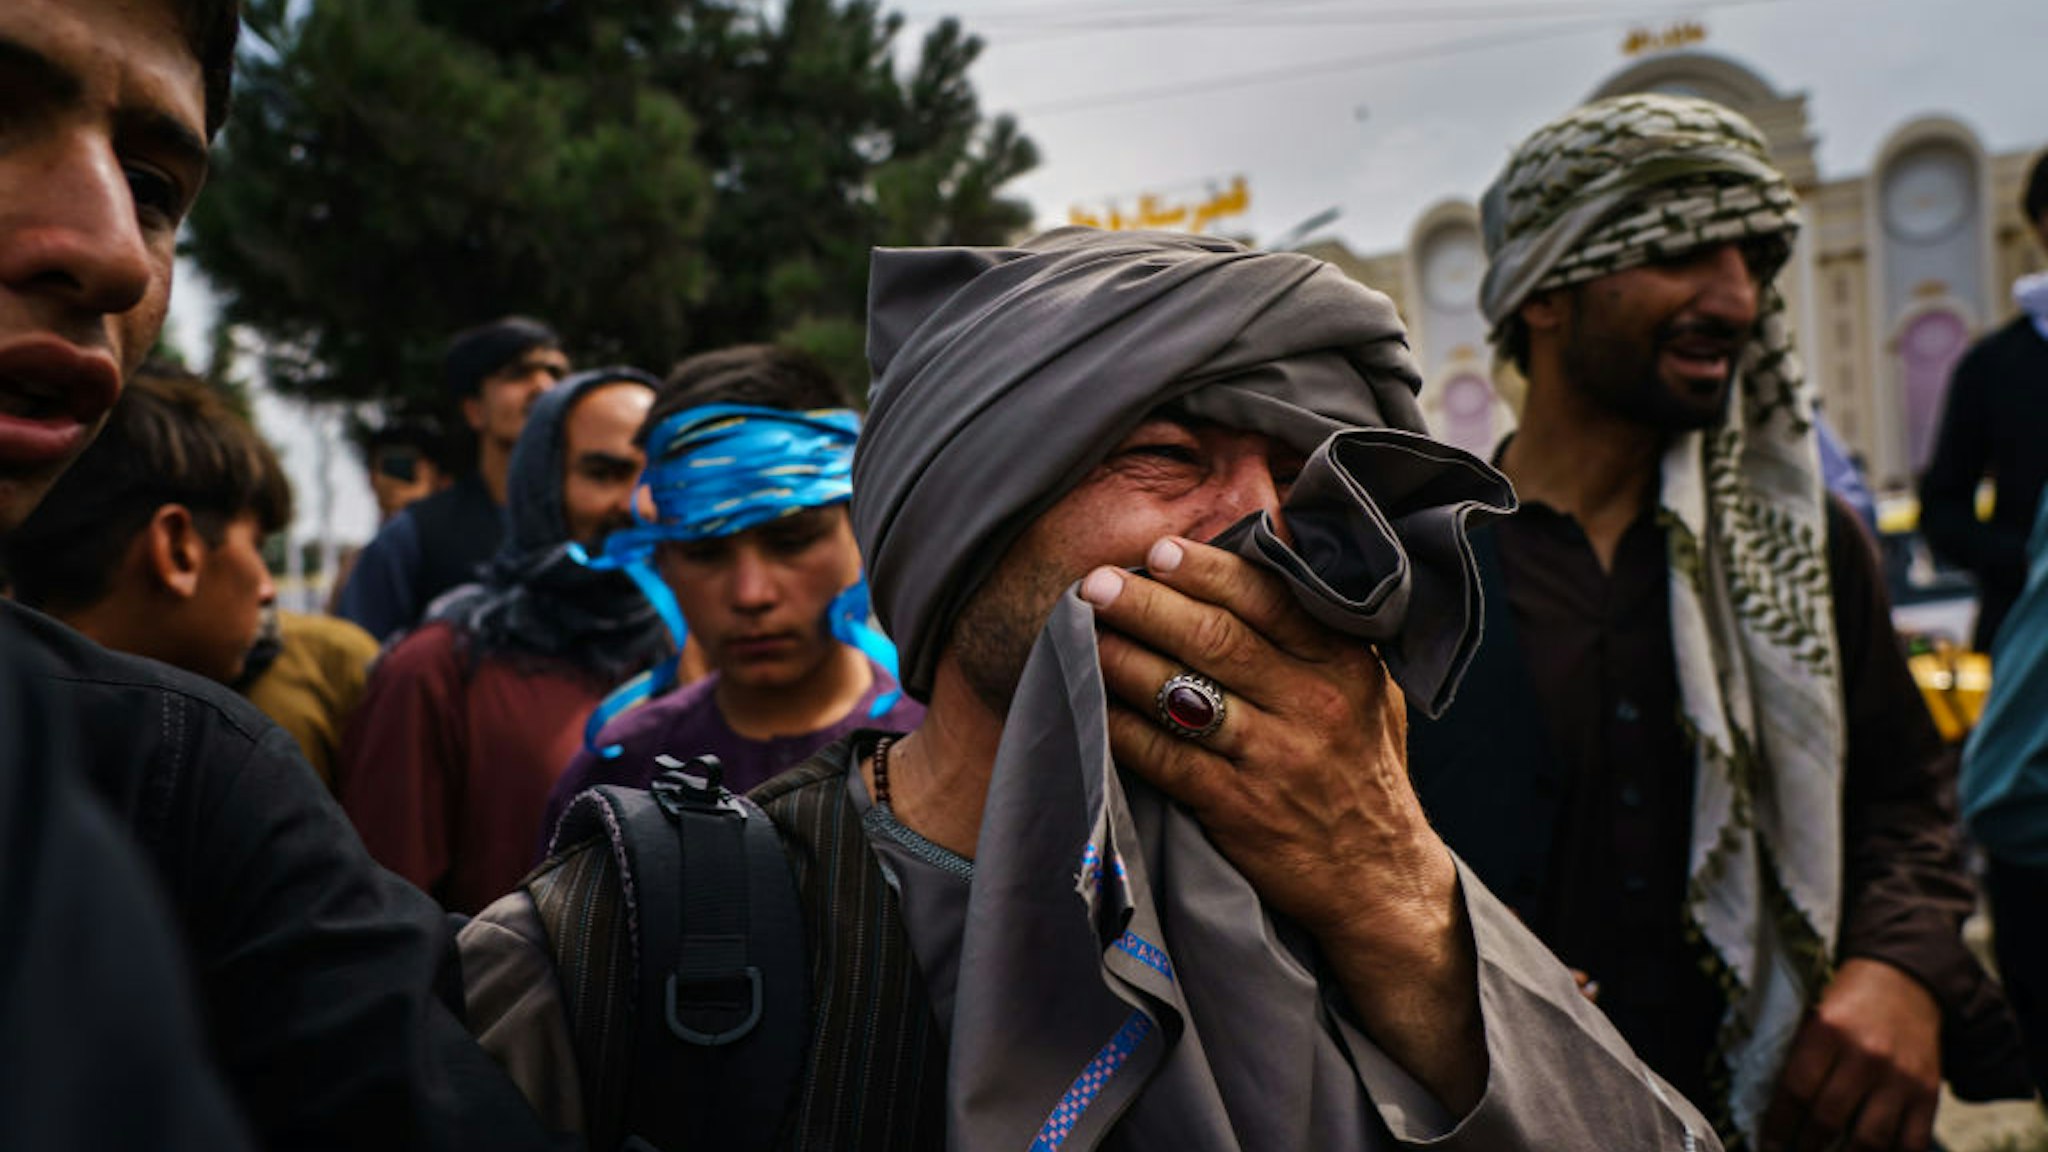 KABUL, AFGHANISTAN -- AUGUST 17, 2021: A man cries as he watches fellow Afghans get wounded after Taliban fighters use guns fire, whips, sticks and sharp objects to maintain crowd control over thousands of Afghans who continue to wait outside the Kabul Airport for a way out, on airport road in Kabul, Afghanistan, Tuesday, Aug. 17, 2021. At least half dozen were wounded, within the hour of violent escalation, including a woman and her child. (MARCUS YAM / LOS ANGELES TIMES)